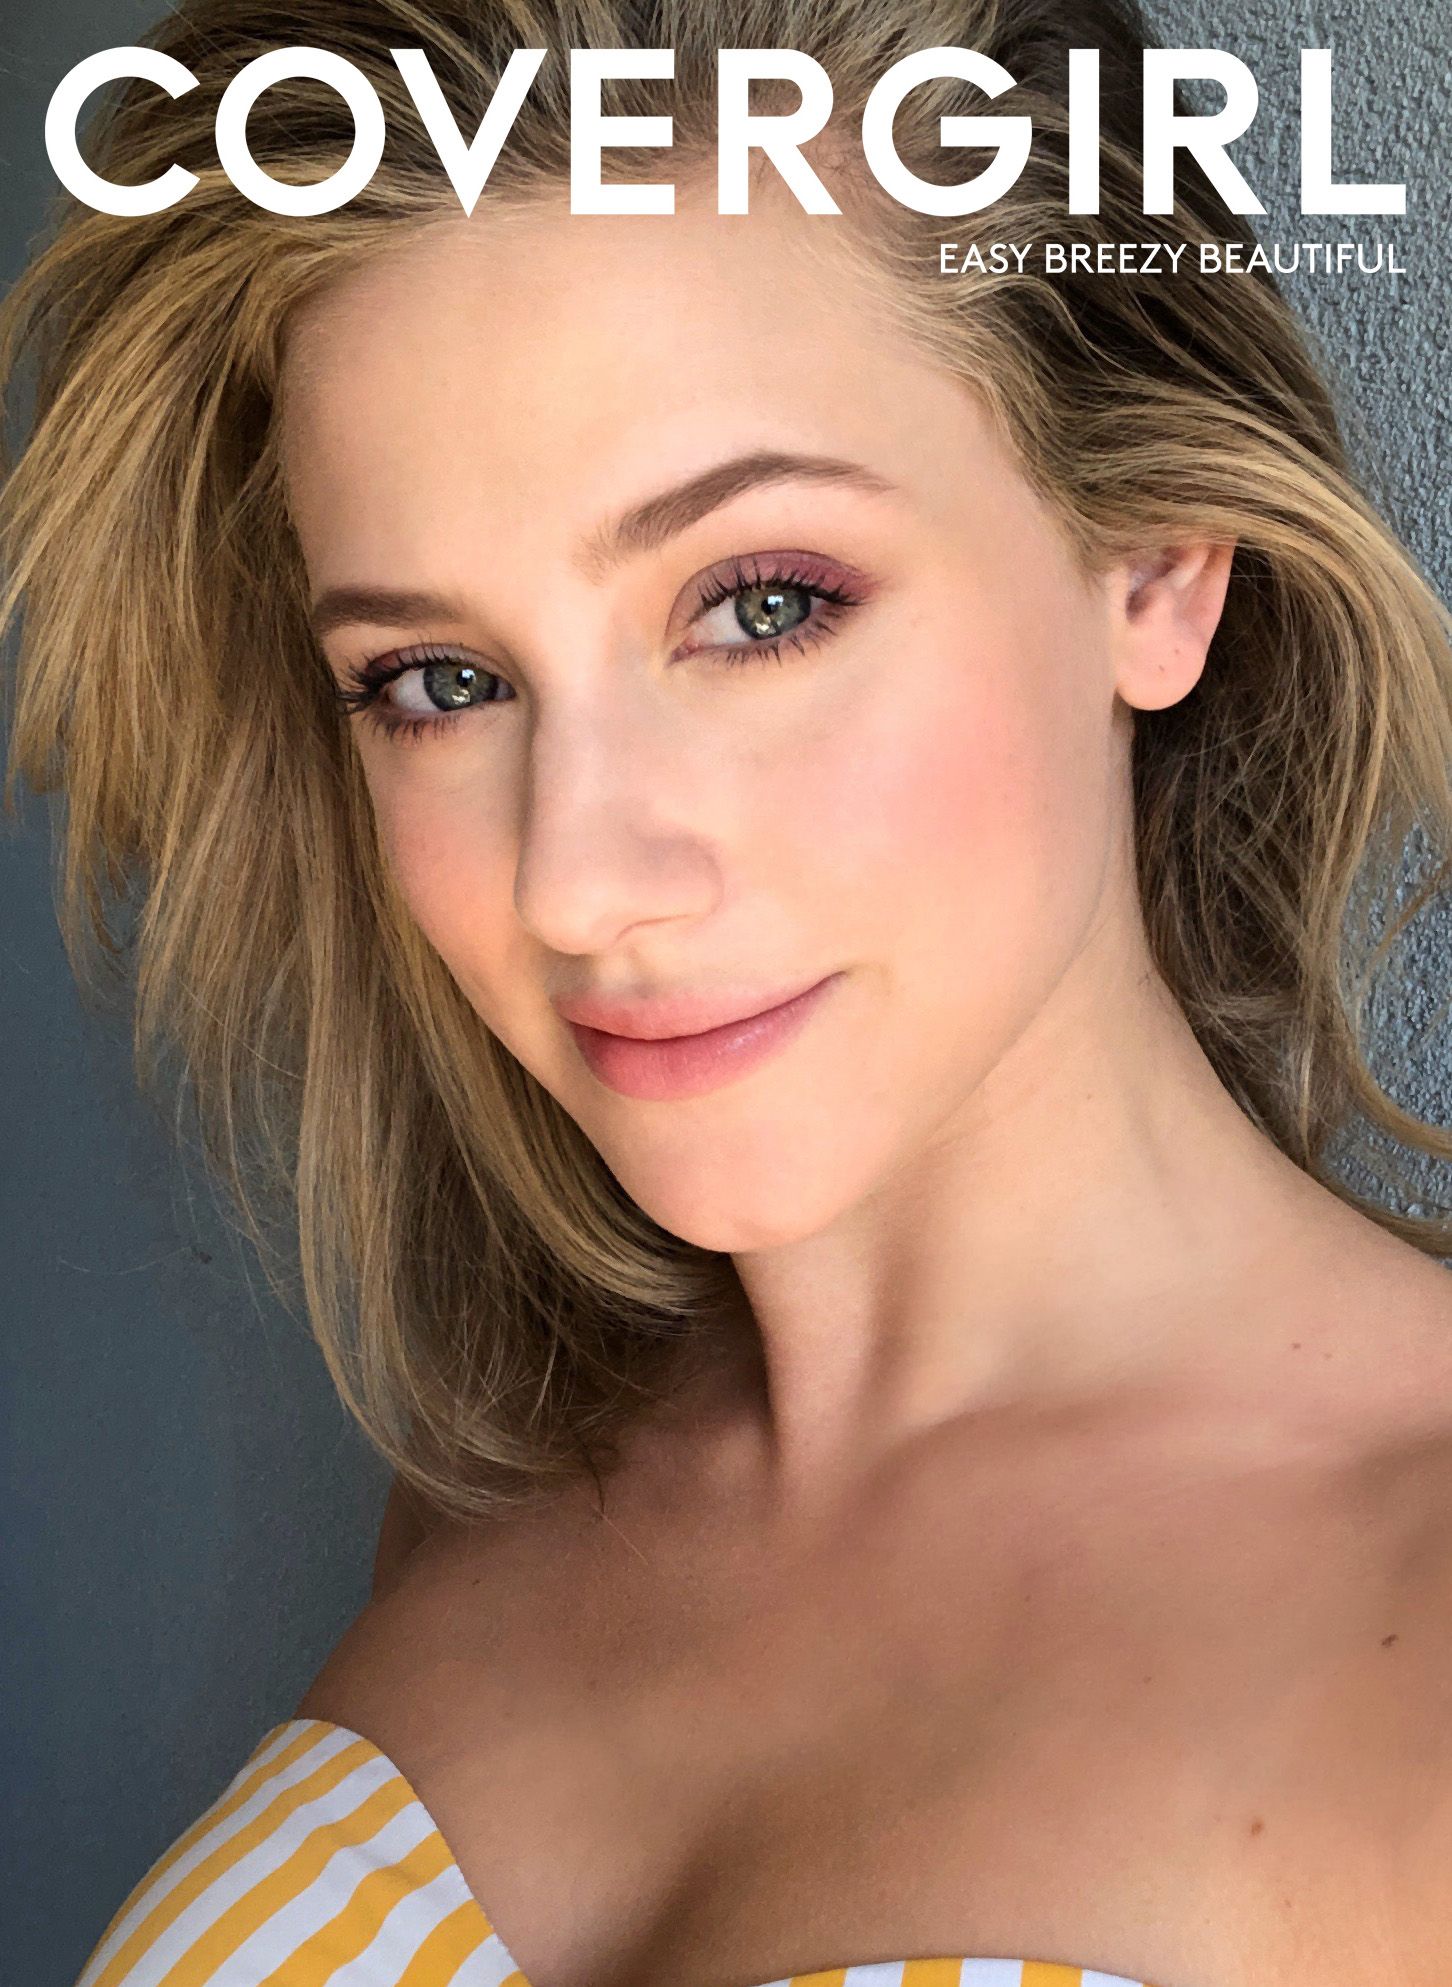 Lili Reinhart, The New Face of Covergirl, Did Her Own Makeup for the